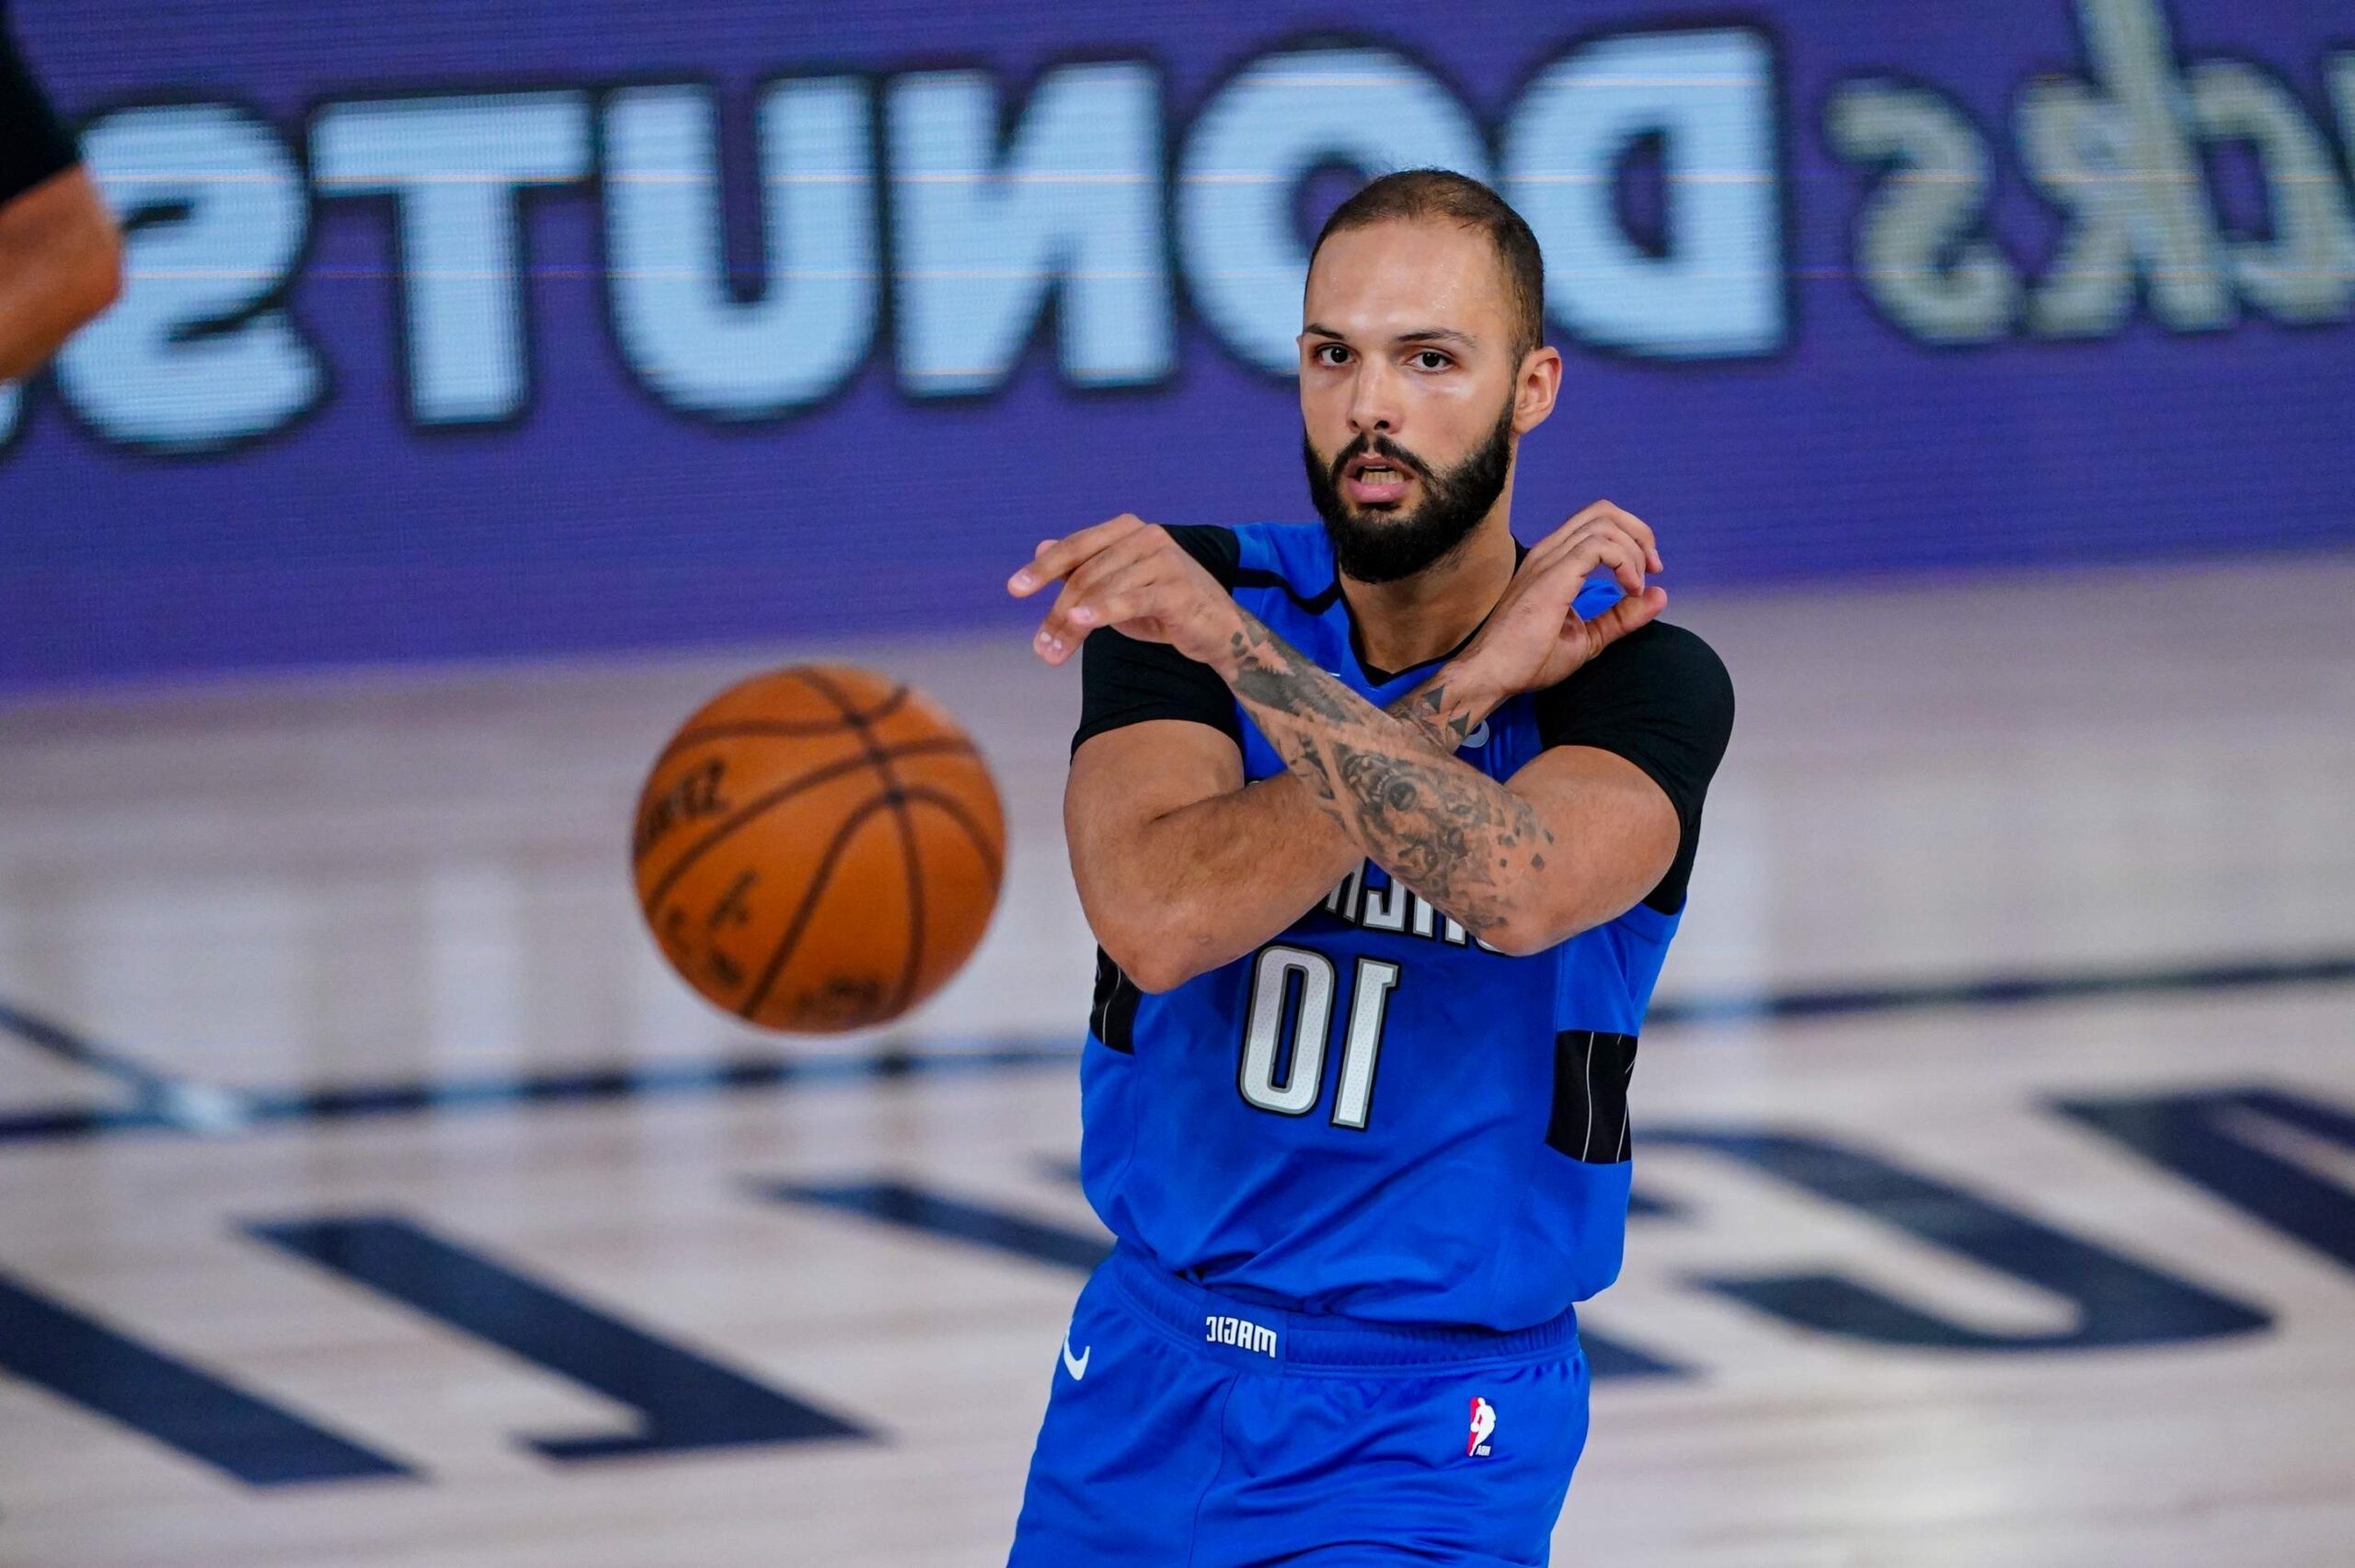 evan-fournier-wants-celtics-followers-to-google-him-8230-8230-however-don-t-do-it-1718948-scaled